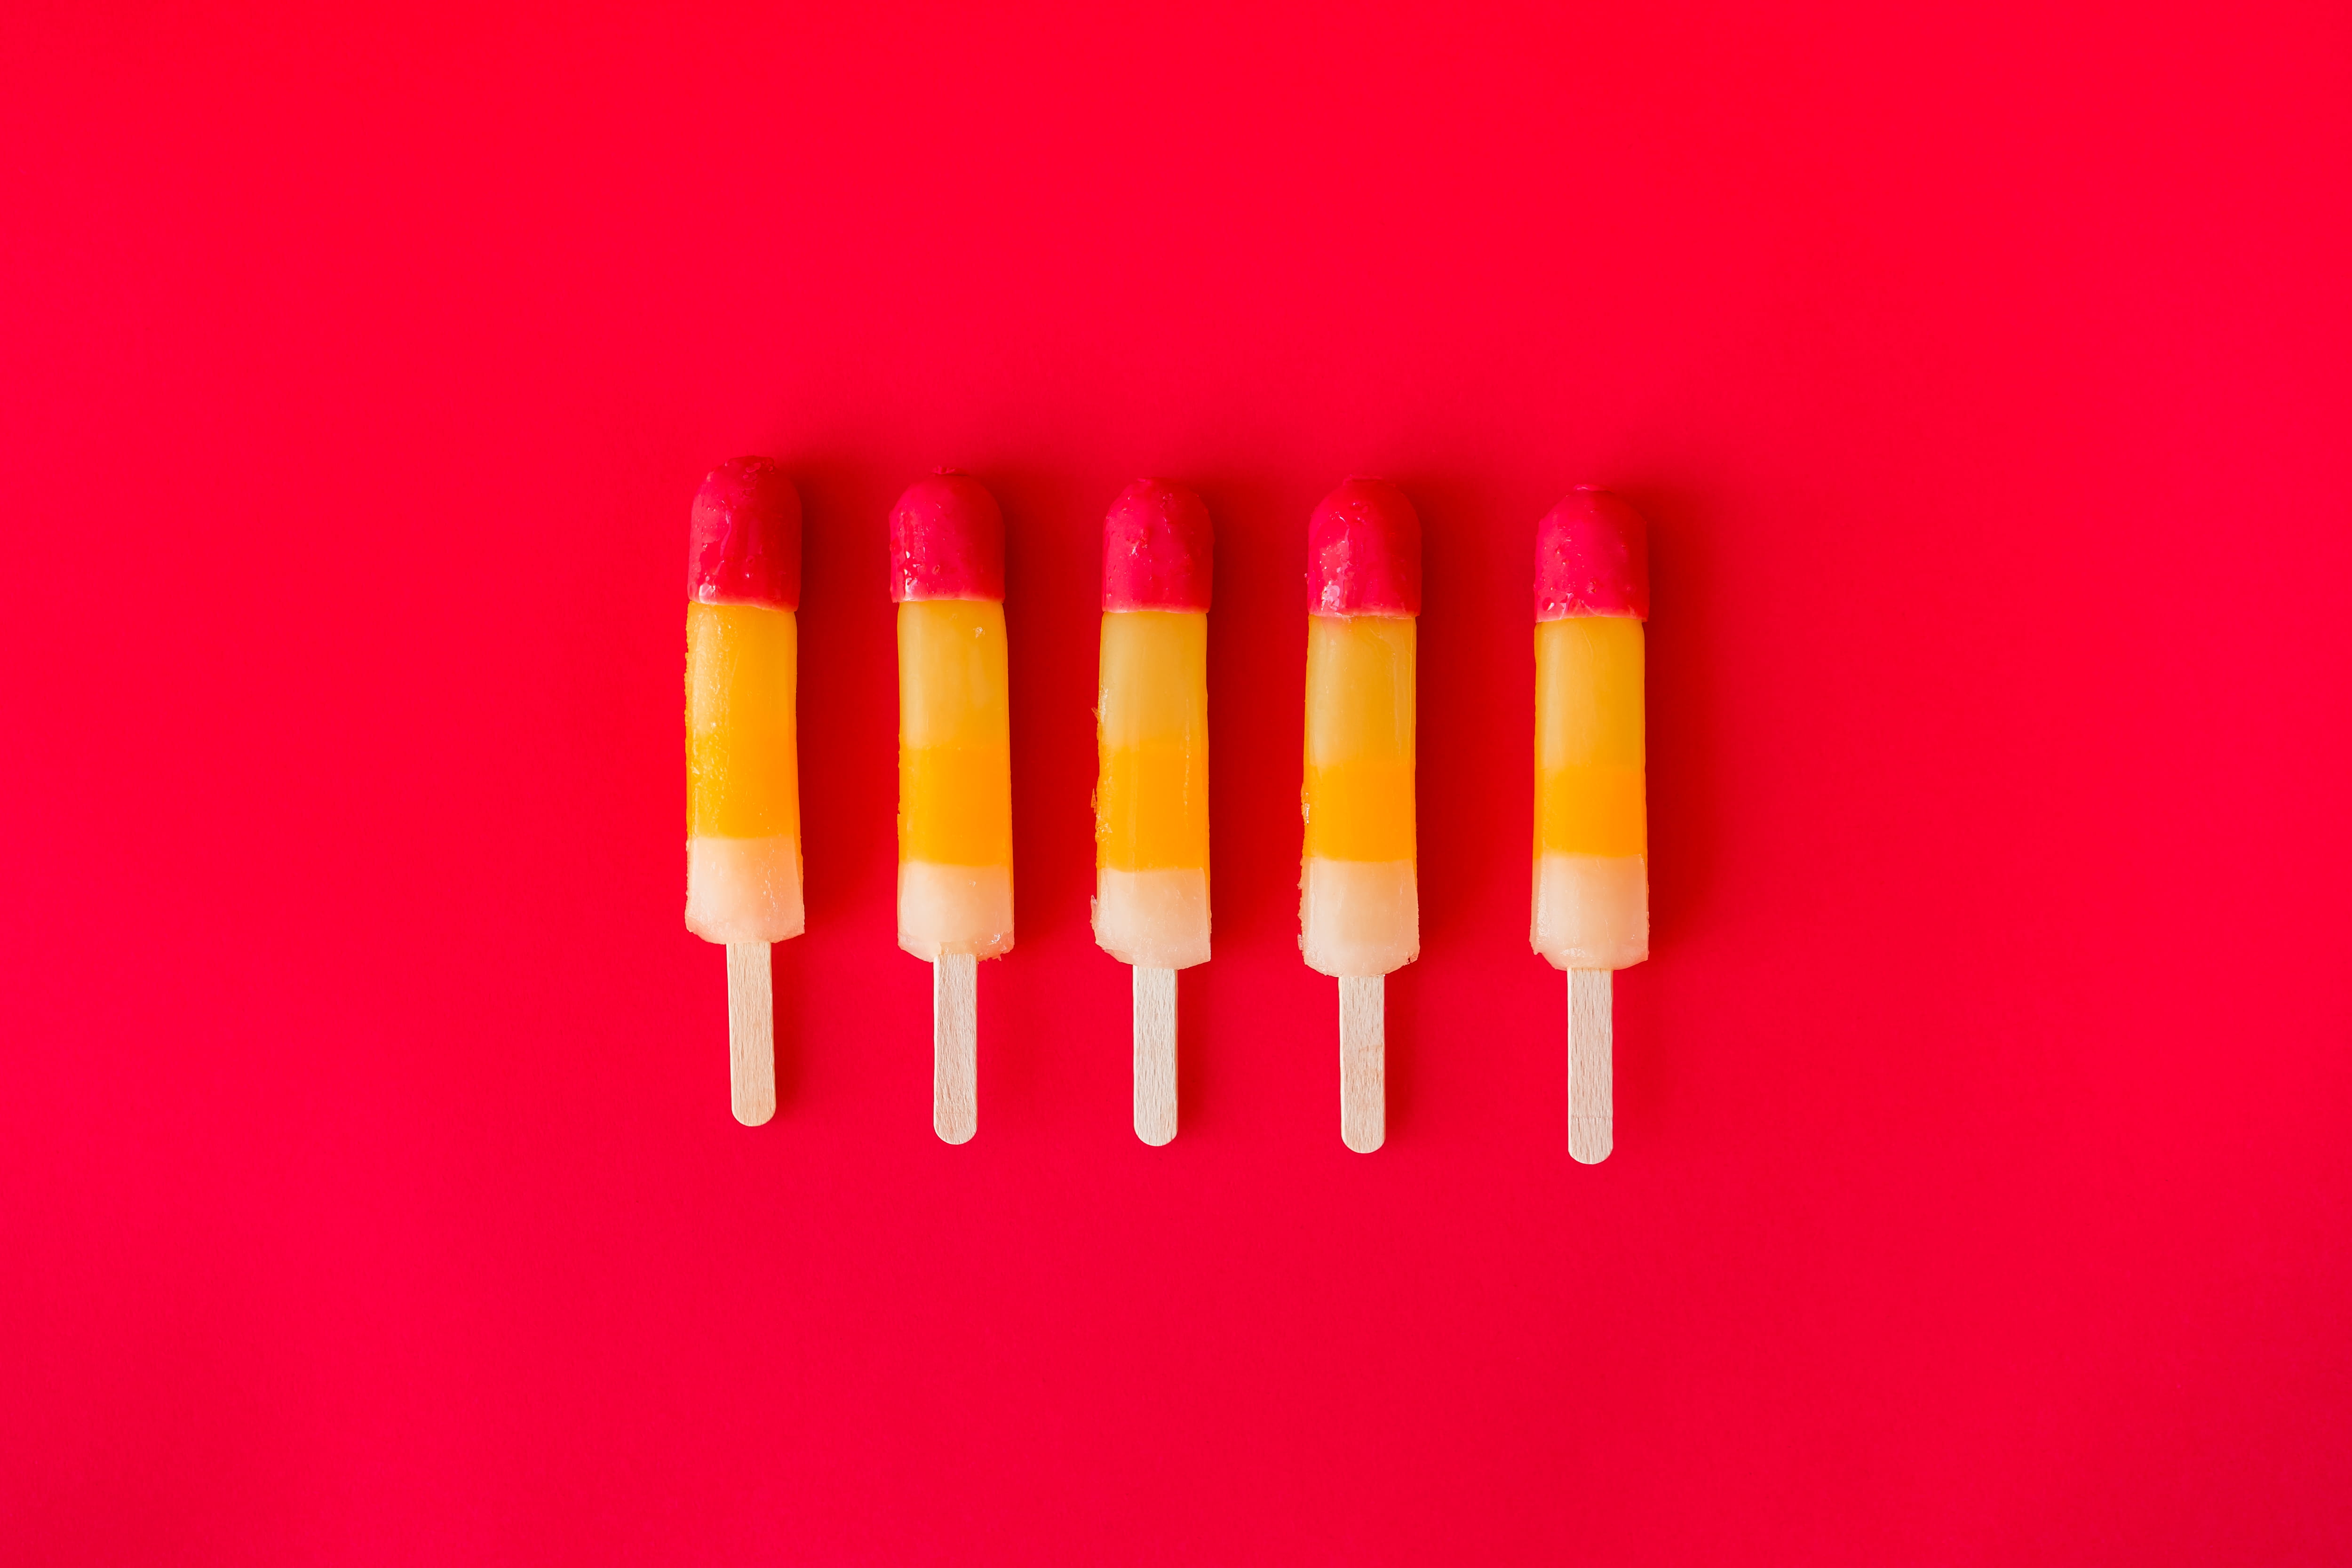 Ice Lollies, colorful, colors, flat design, food, foodie, fun